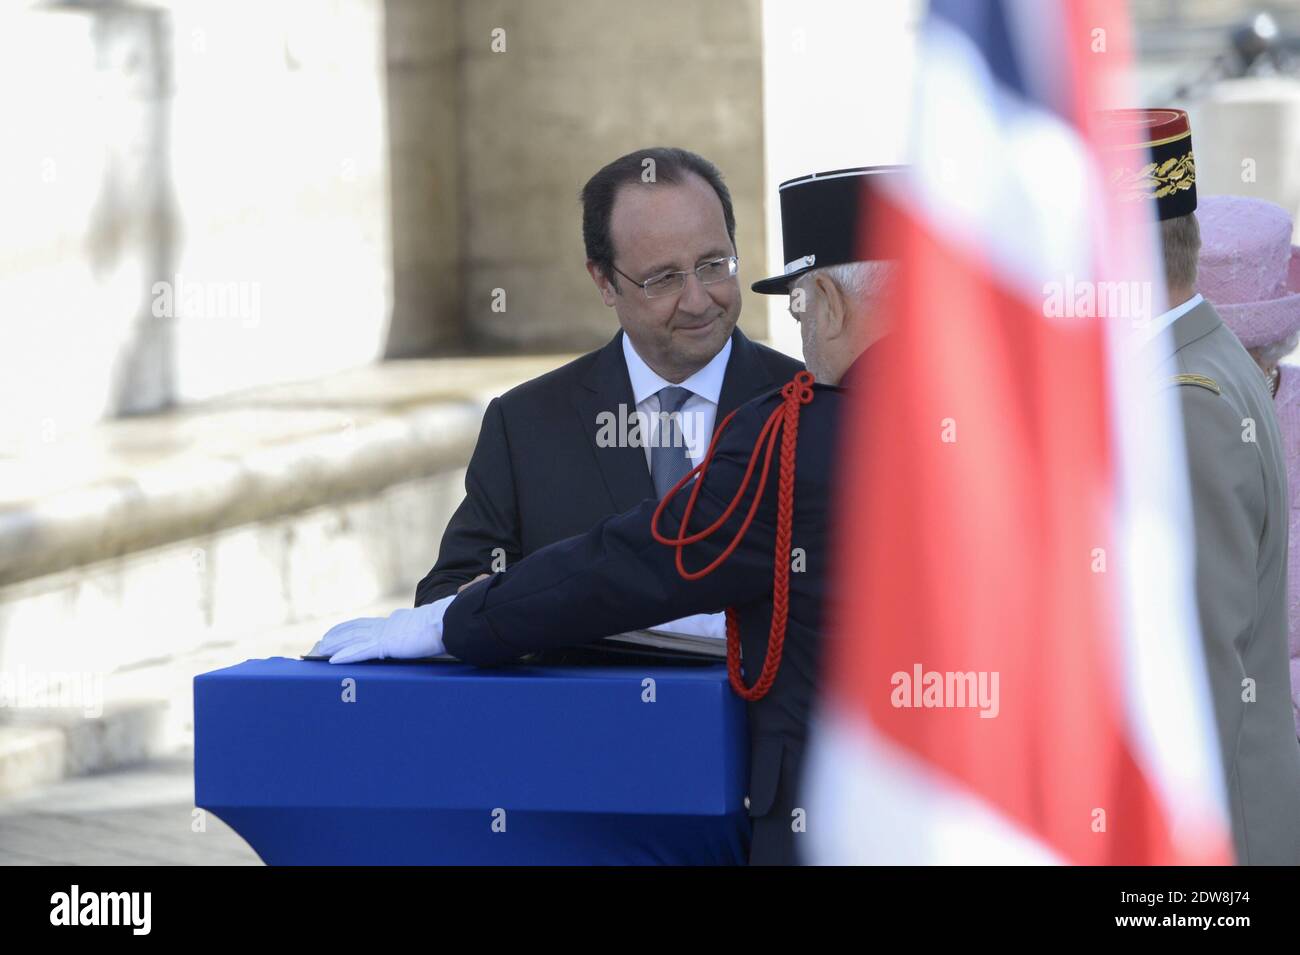 Queen Elizabeth II lays a memorial wreath along with French President Francois Hollande at the Arc de Triomphe during a State visit to France and the celebration of the D-Day 70th anniversary. Paris, France, June 5, 2014. Photo by Gilles Rolle/Pool/ABACAPRESS.COM Stock Photo